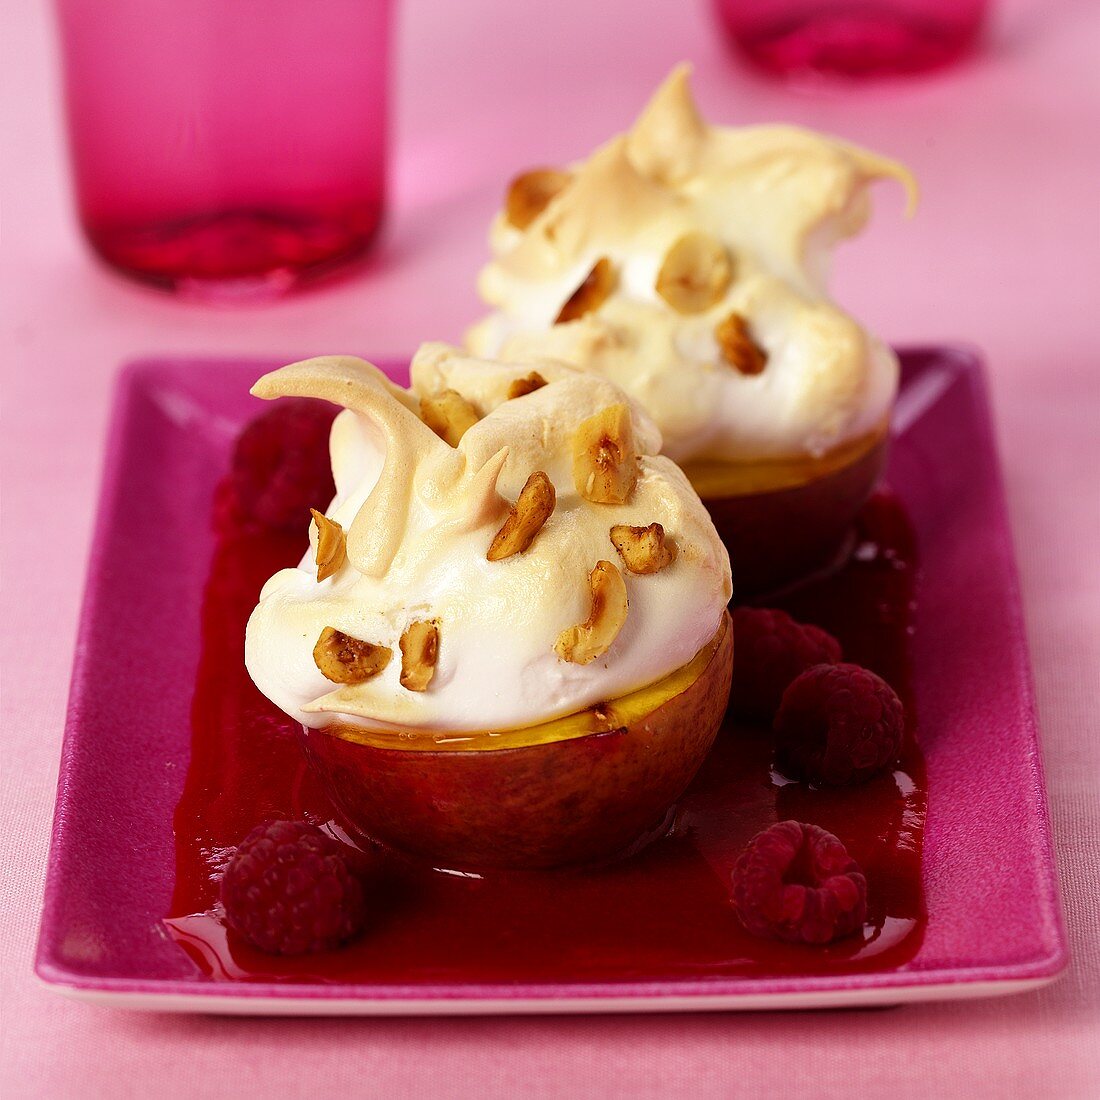 Peach brulee with raspberry sauce and nuts